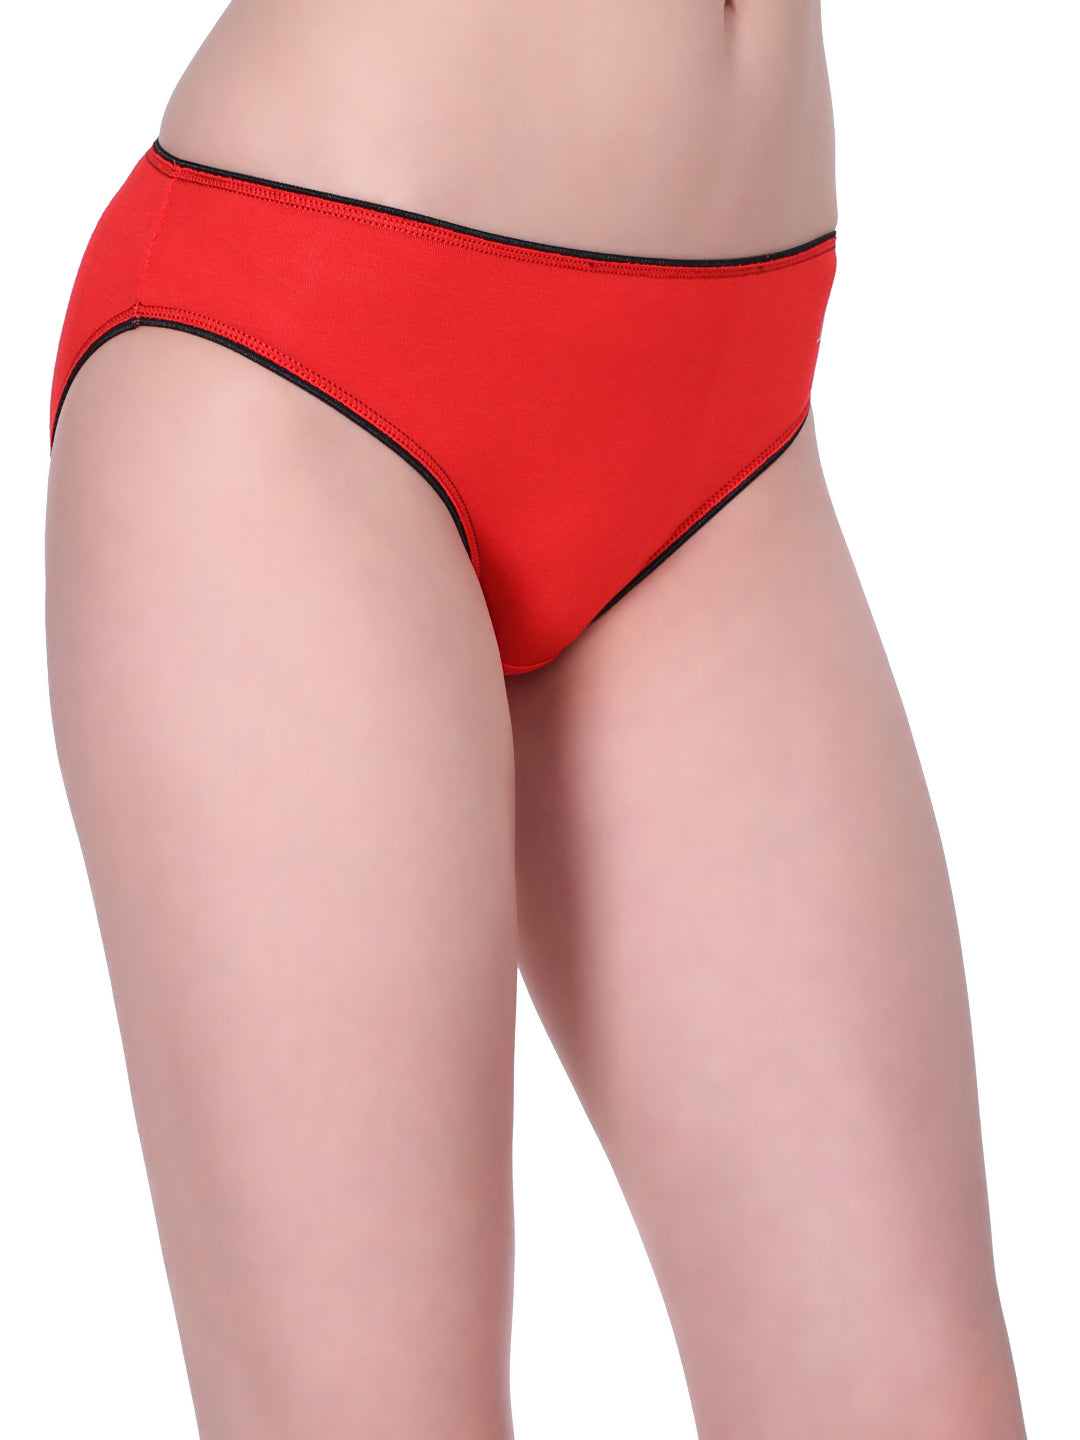 Red Rose Cotton Low Rise Full Coverage Bikini Panty (Pack of 3)